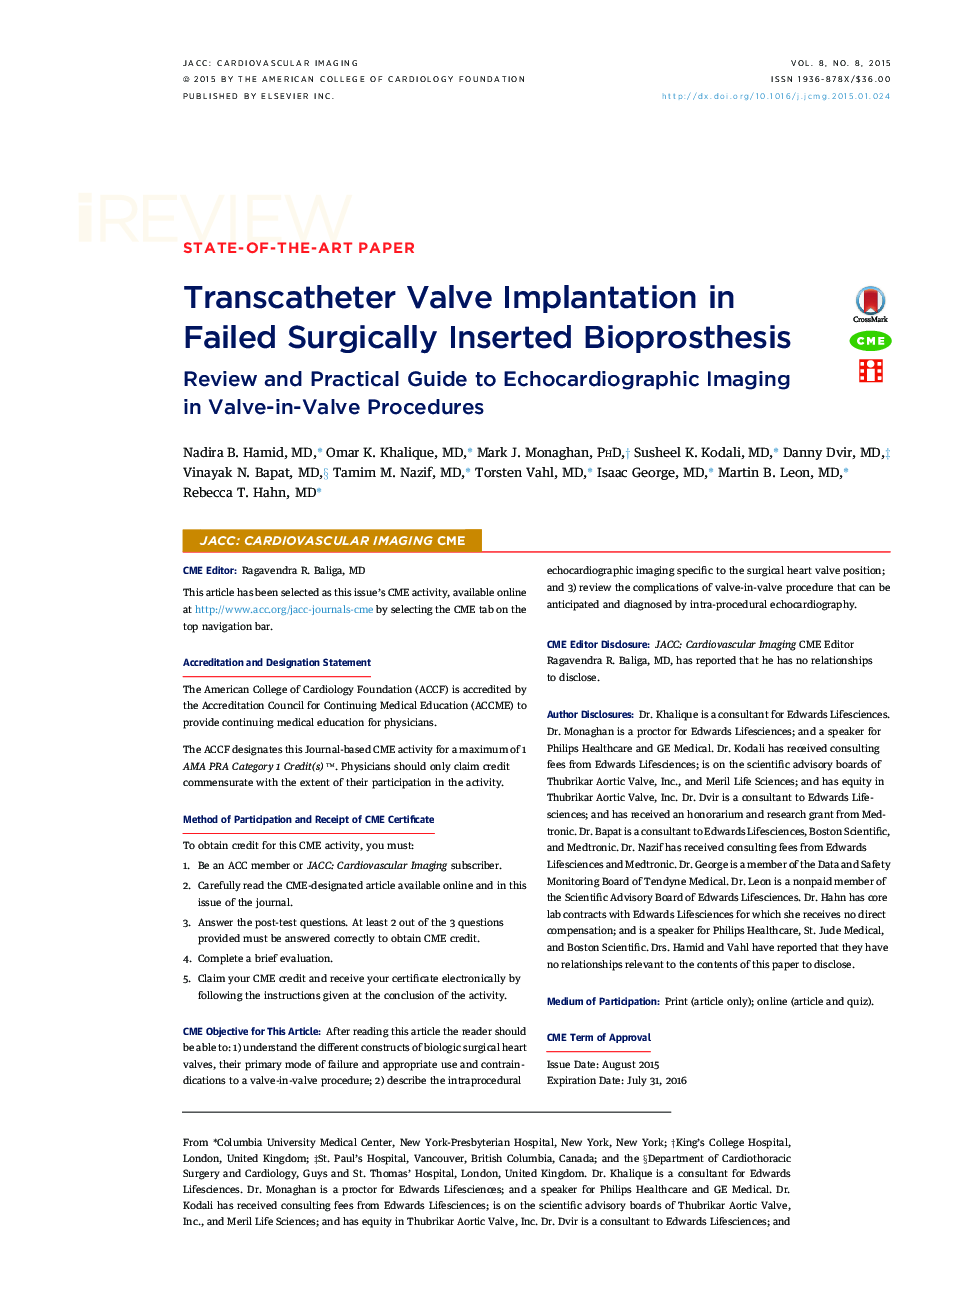 Transcatheter Valve Implantation in Failed Surgically Inserted Bioprosthesis : Review and Practical Guide to Echocardiographic Imaging in Valve-in-Valve Procedures